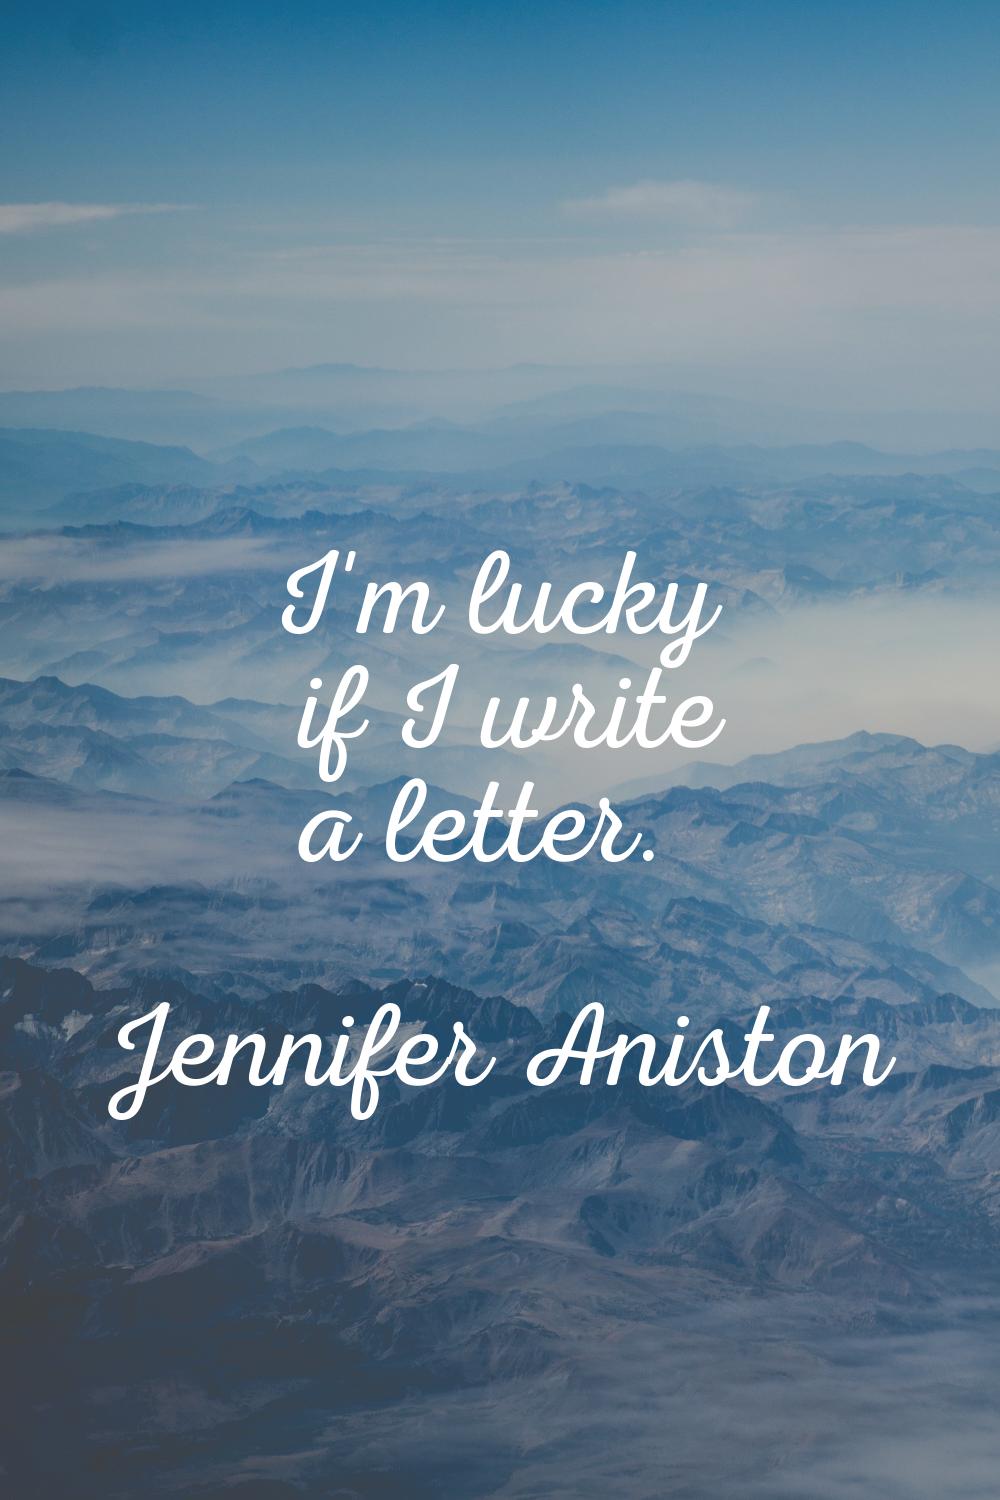 I'm lucky if I write a letter.